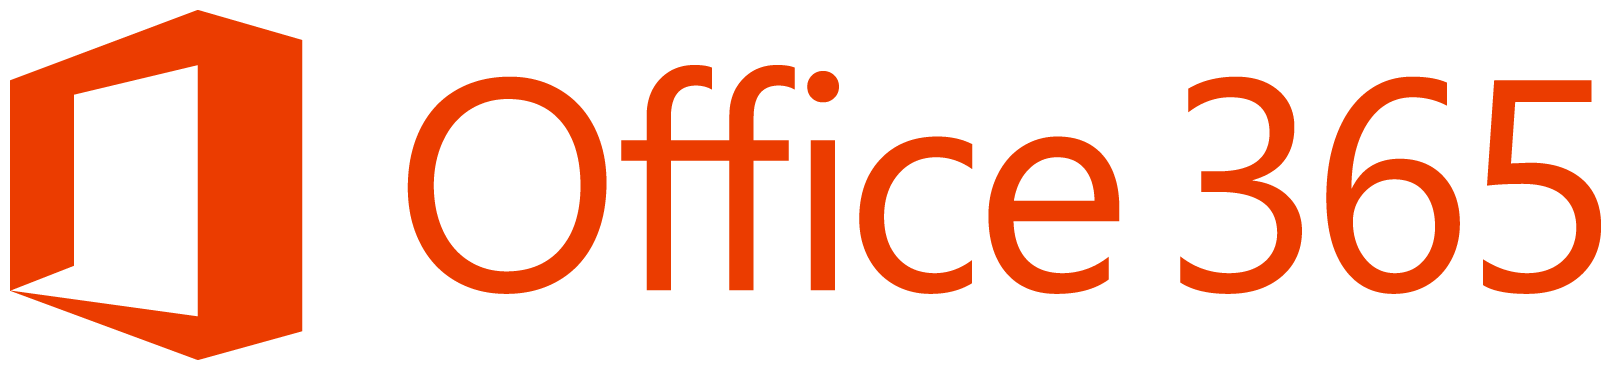 Office365logo.png